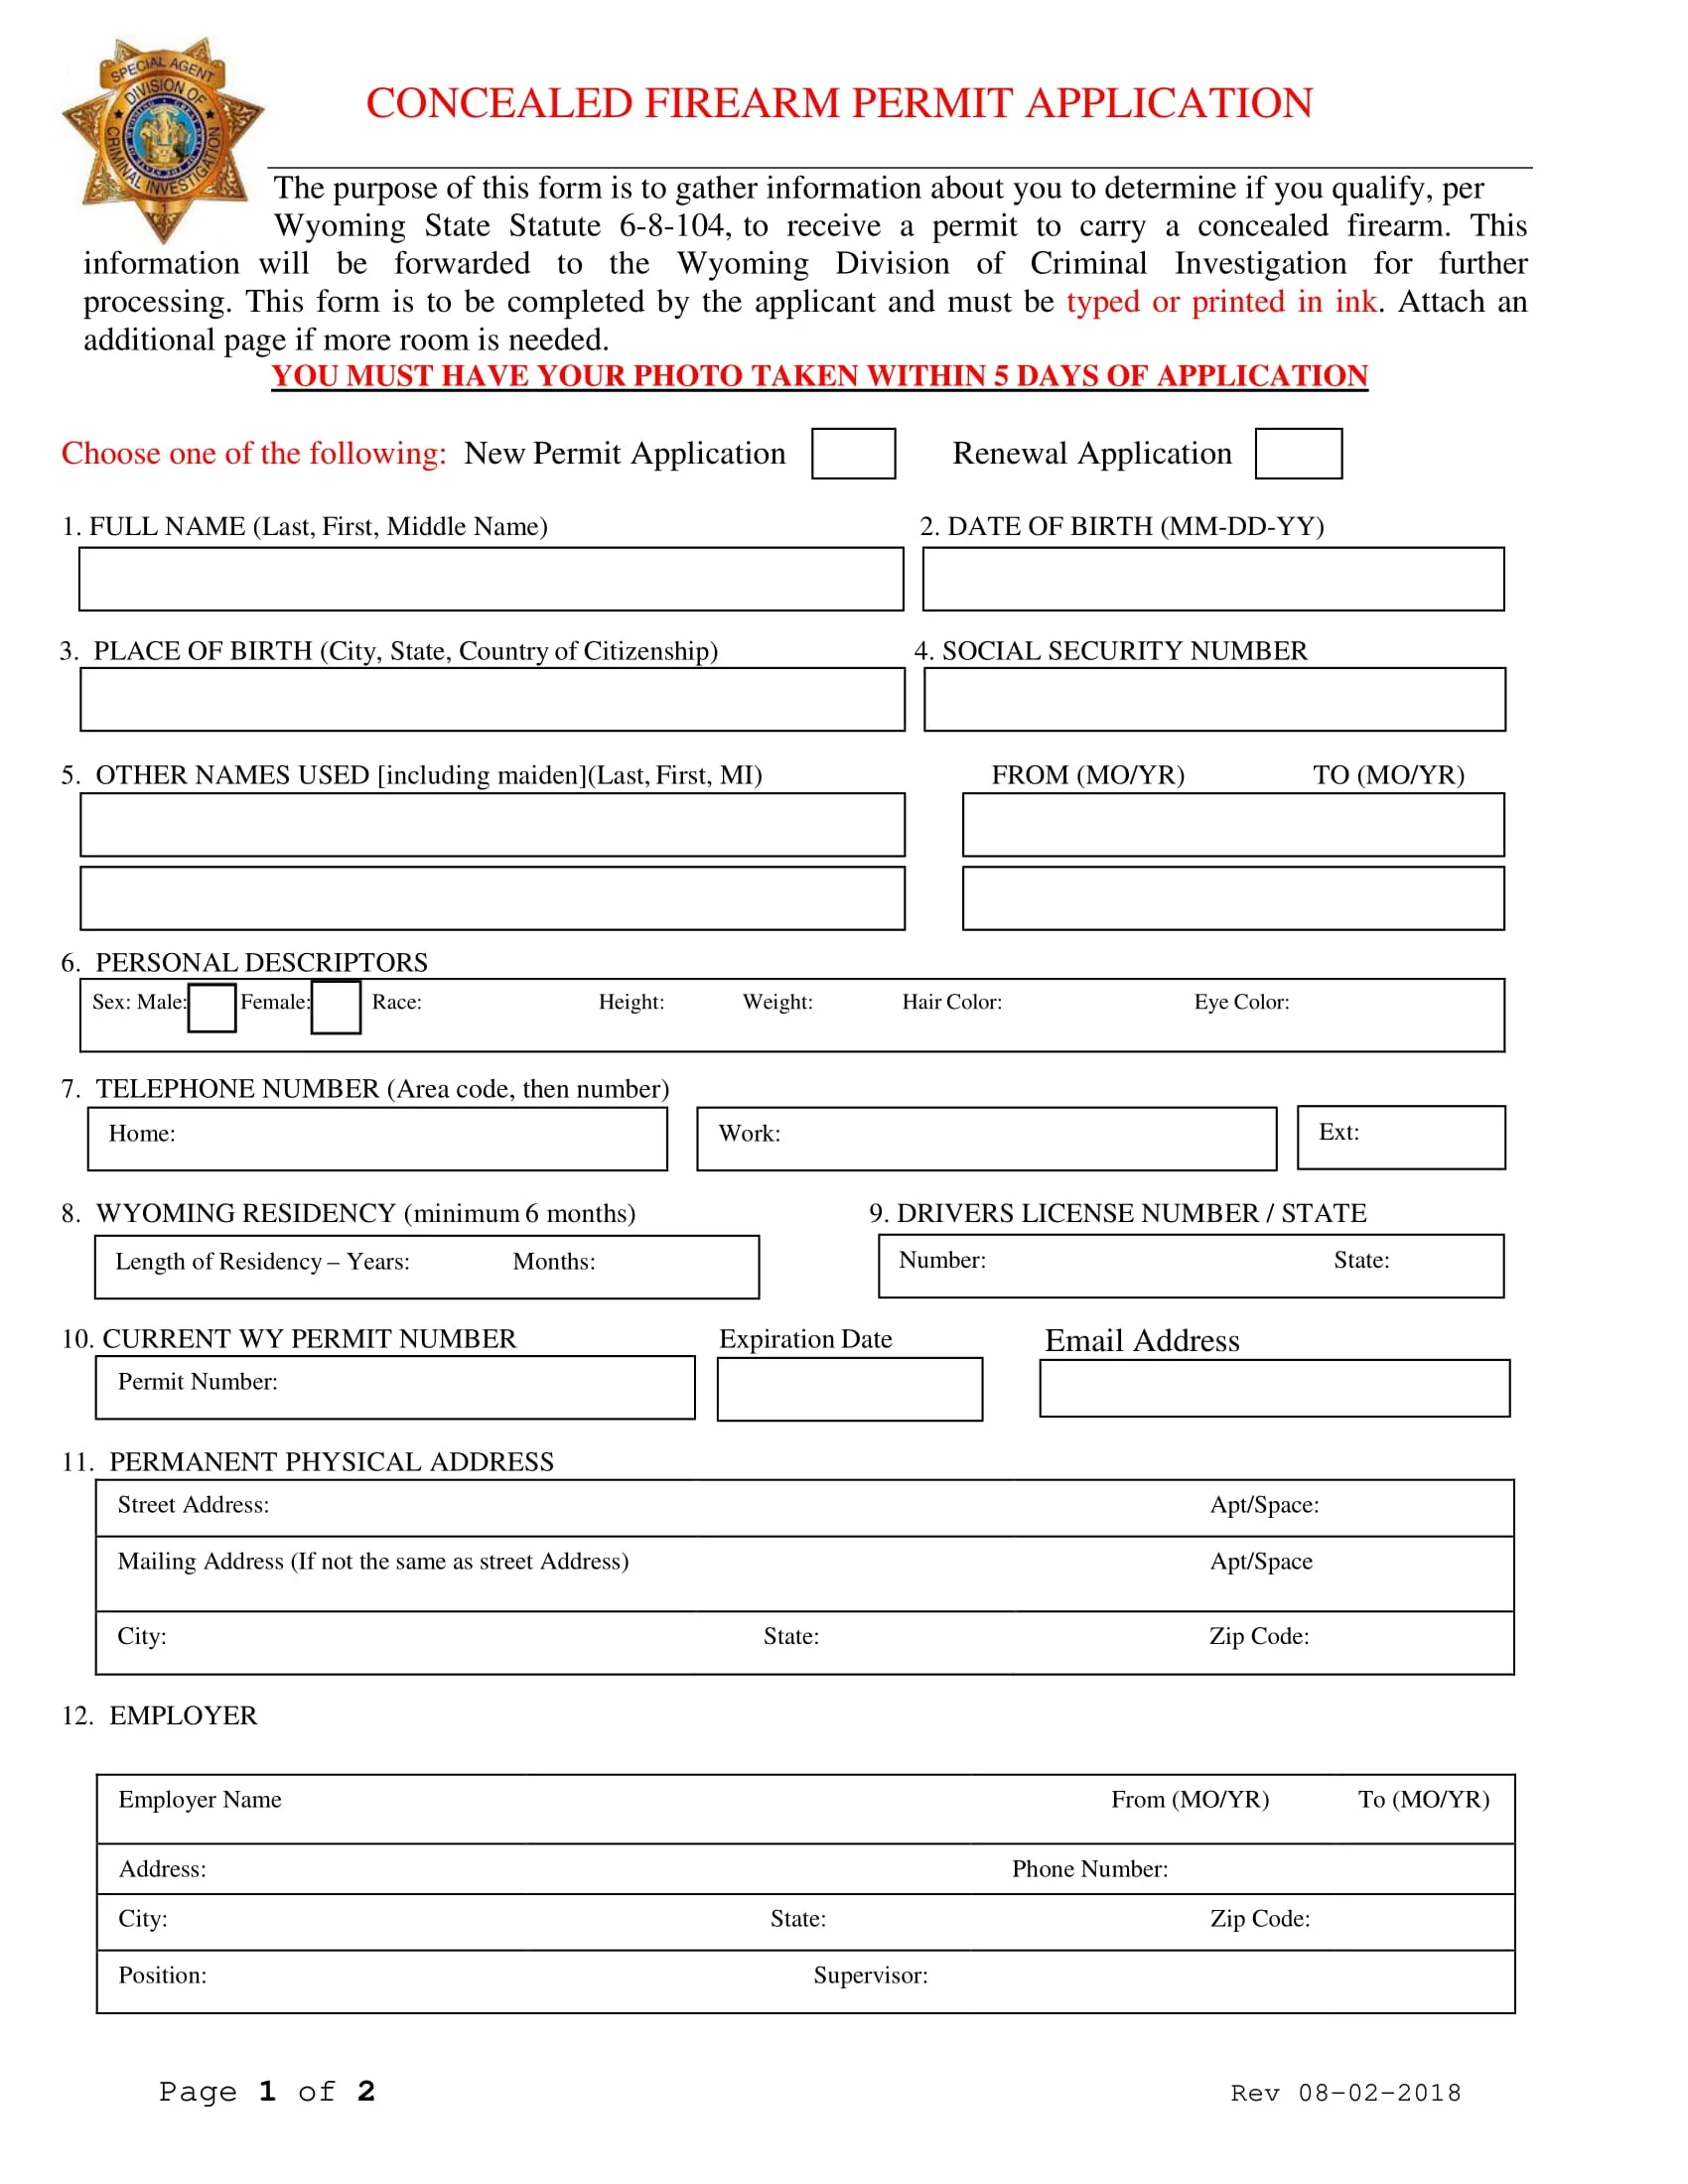 Concealed Firearm Permit Application